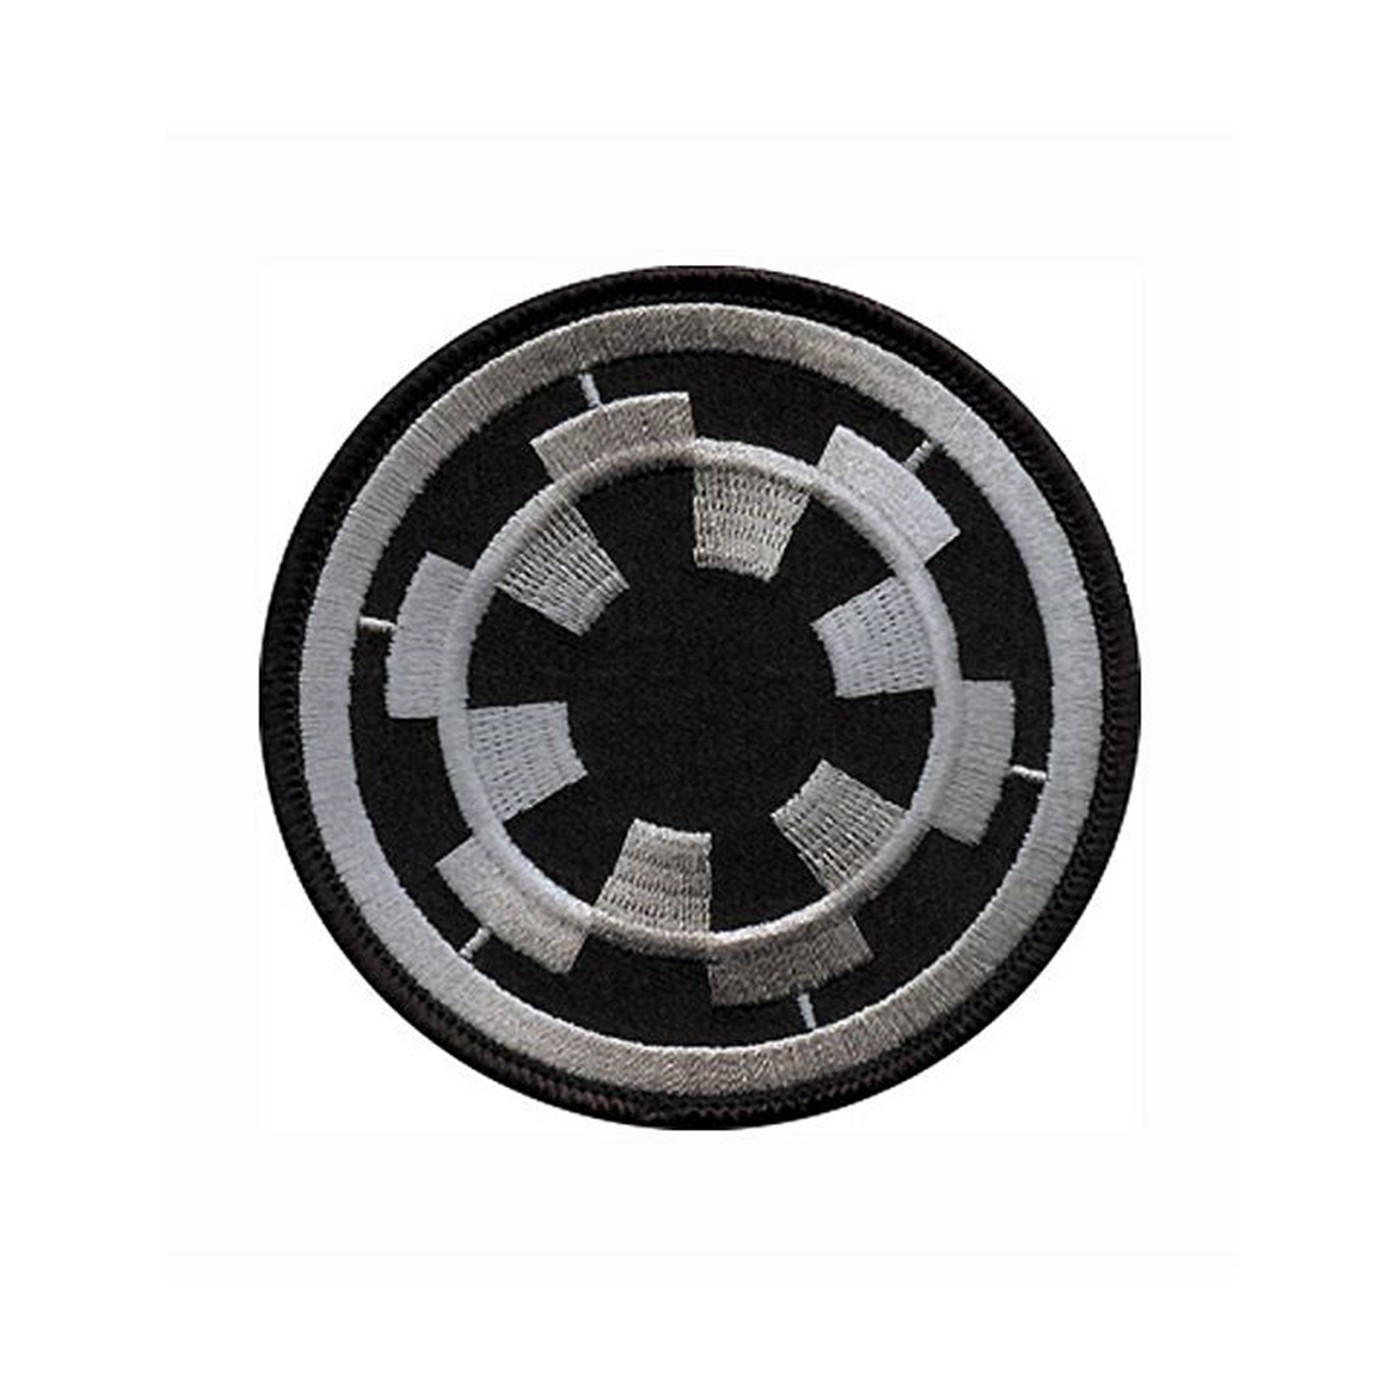 Star Wars Imperial Symbol Patch